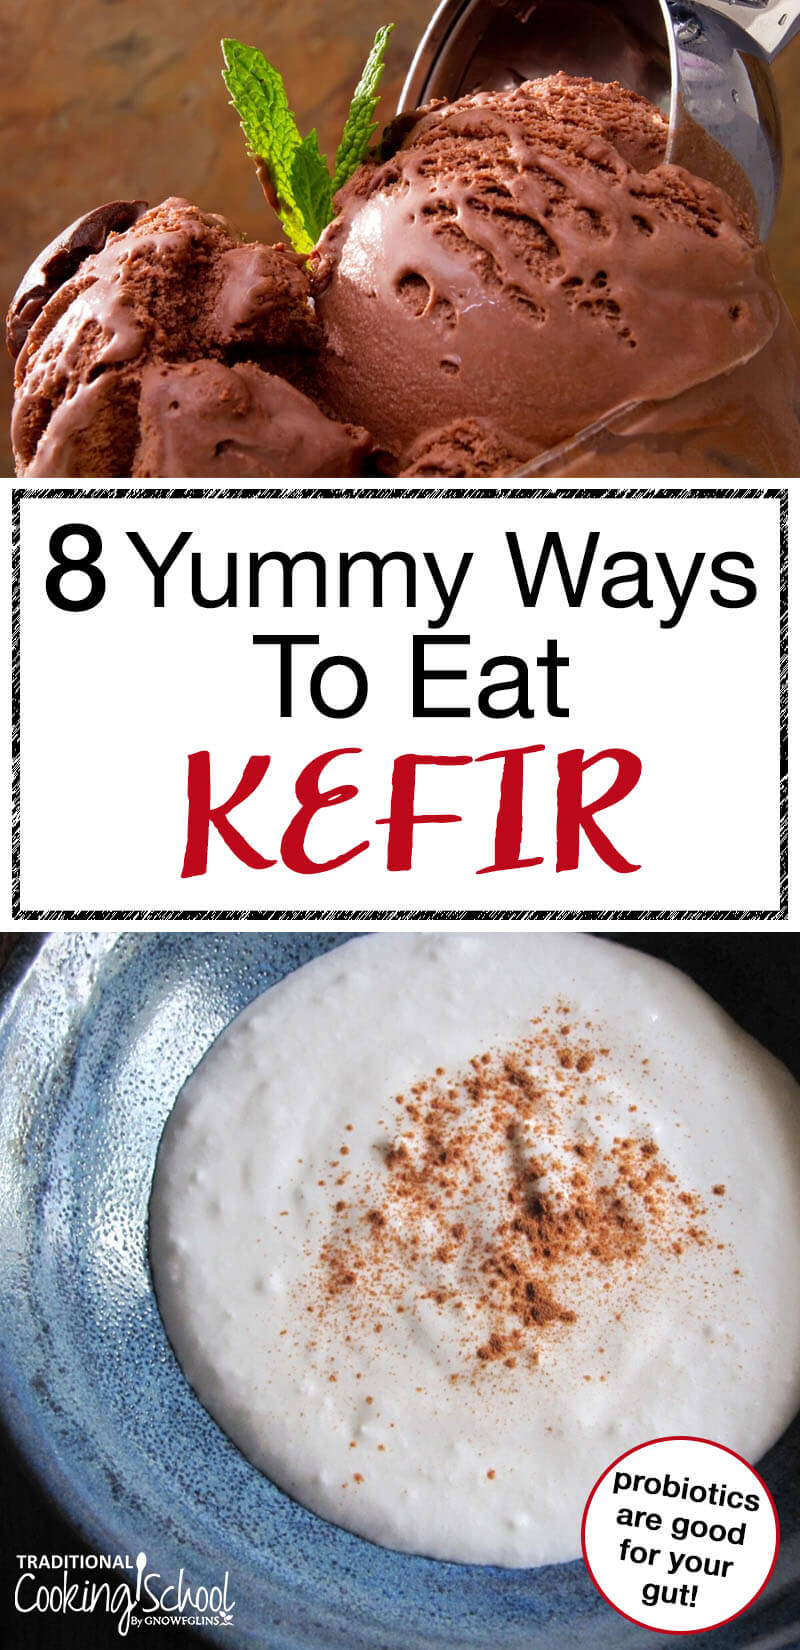 Chocolate ice cream with a mint leaf being scooped by an icecream scoop and an image of milk kefir topped with cinnamon. Text overlay says, "8 Yummy Ways to Eat Kefir - Probiotics are good for your gut!"